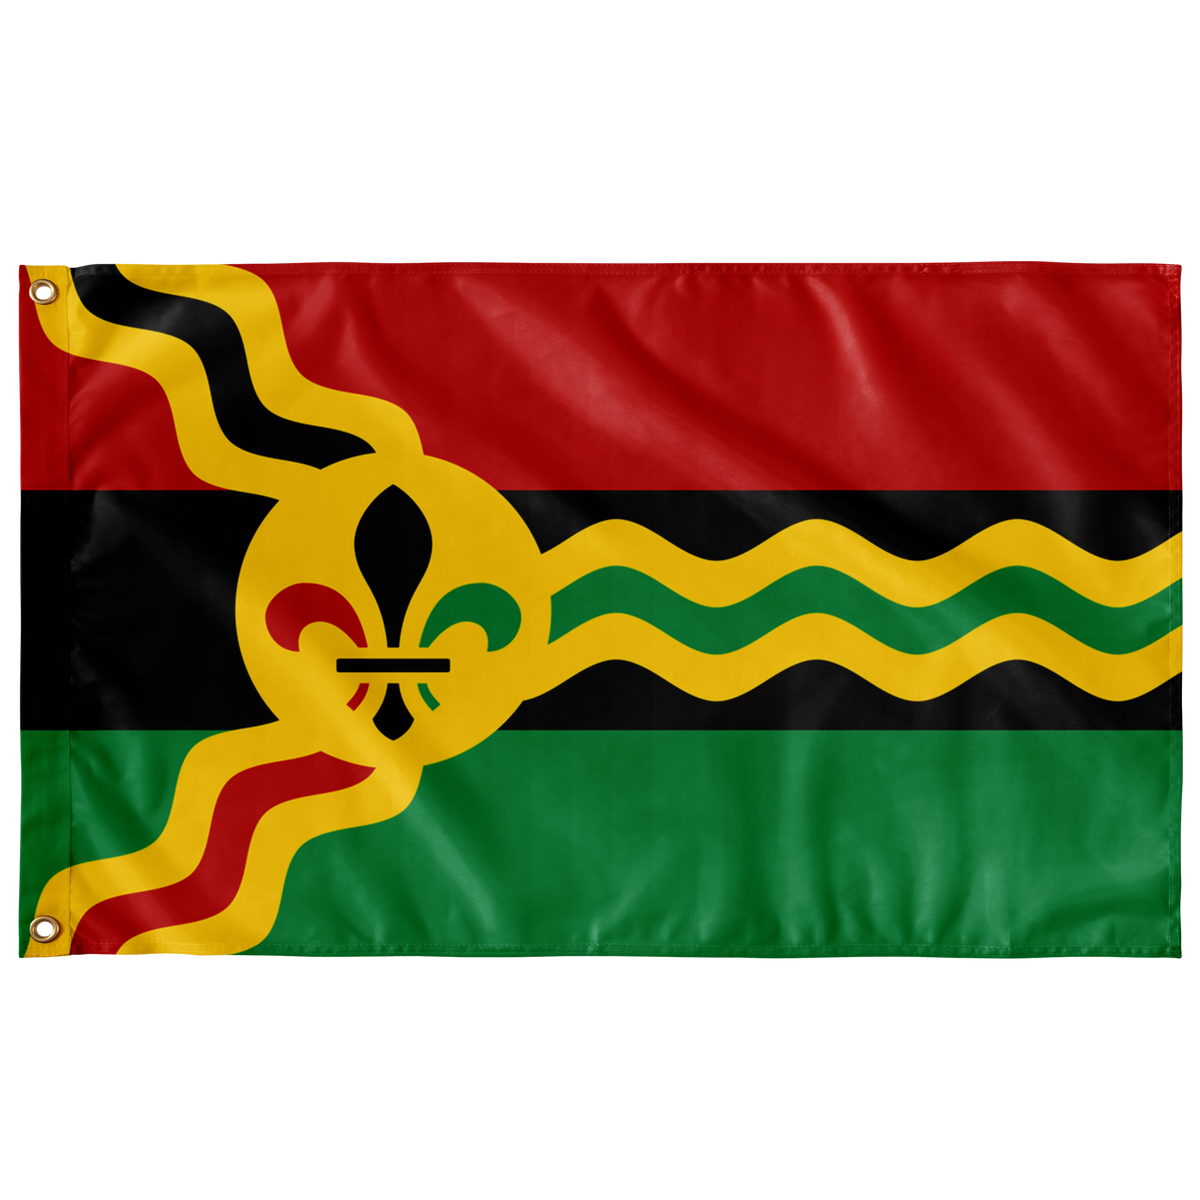 Pan-African flag raised at St. Louis City Hall for Black History